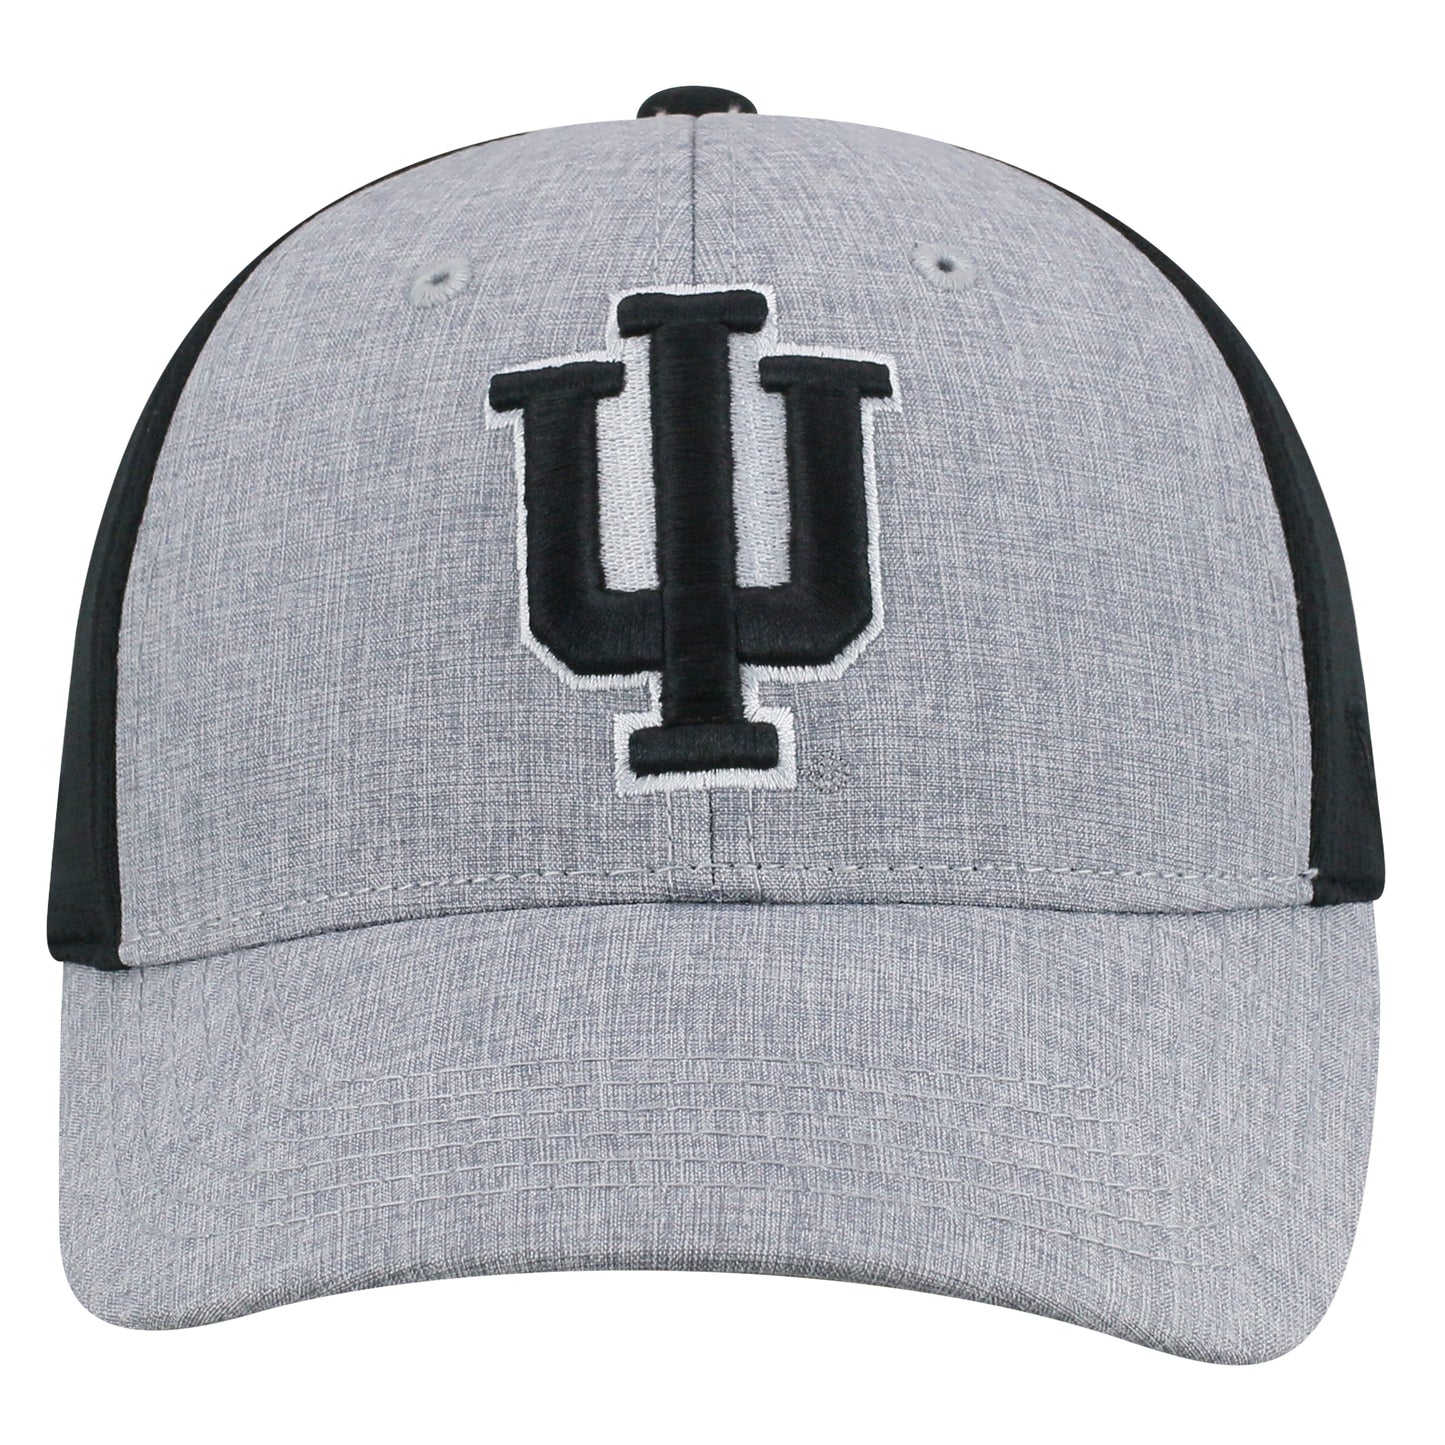 Mens Indiana Hoosiers Fabooia One Fit Flex Fit Hat By Top Of The World